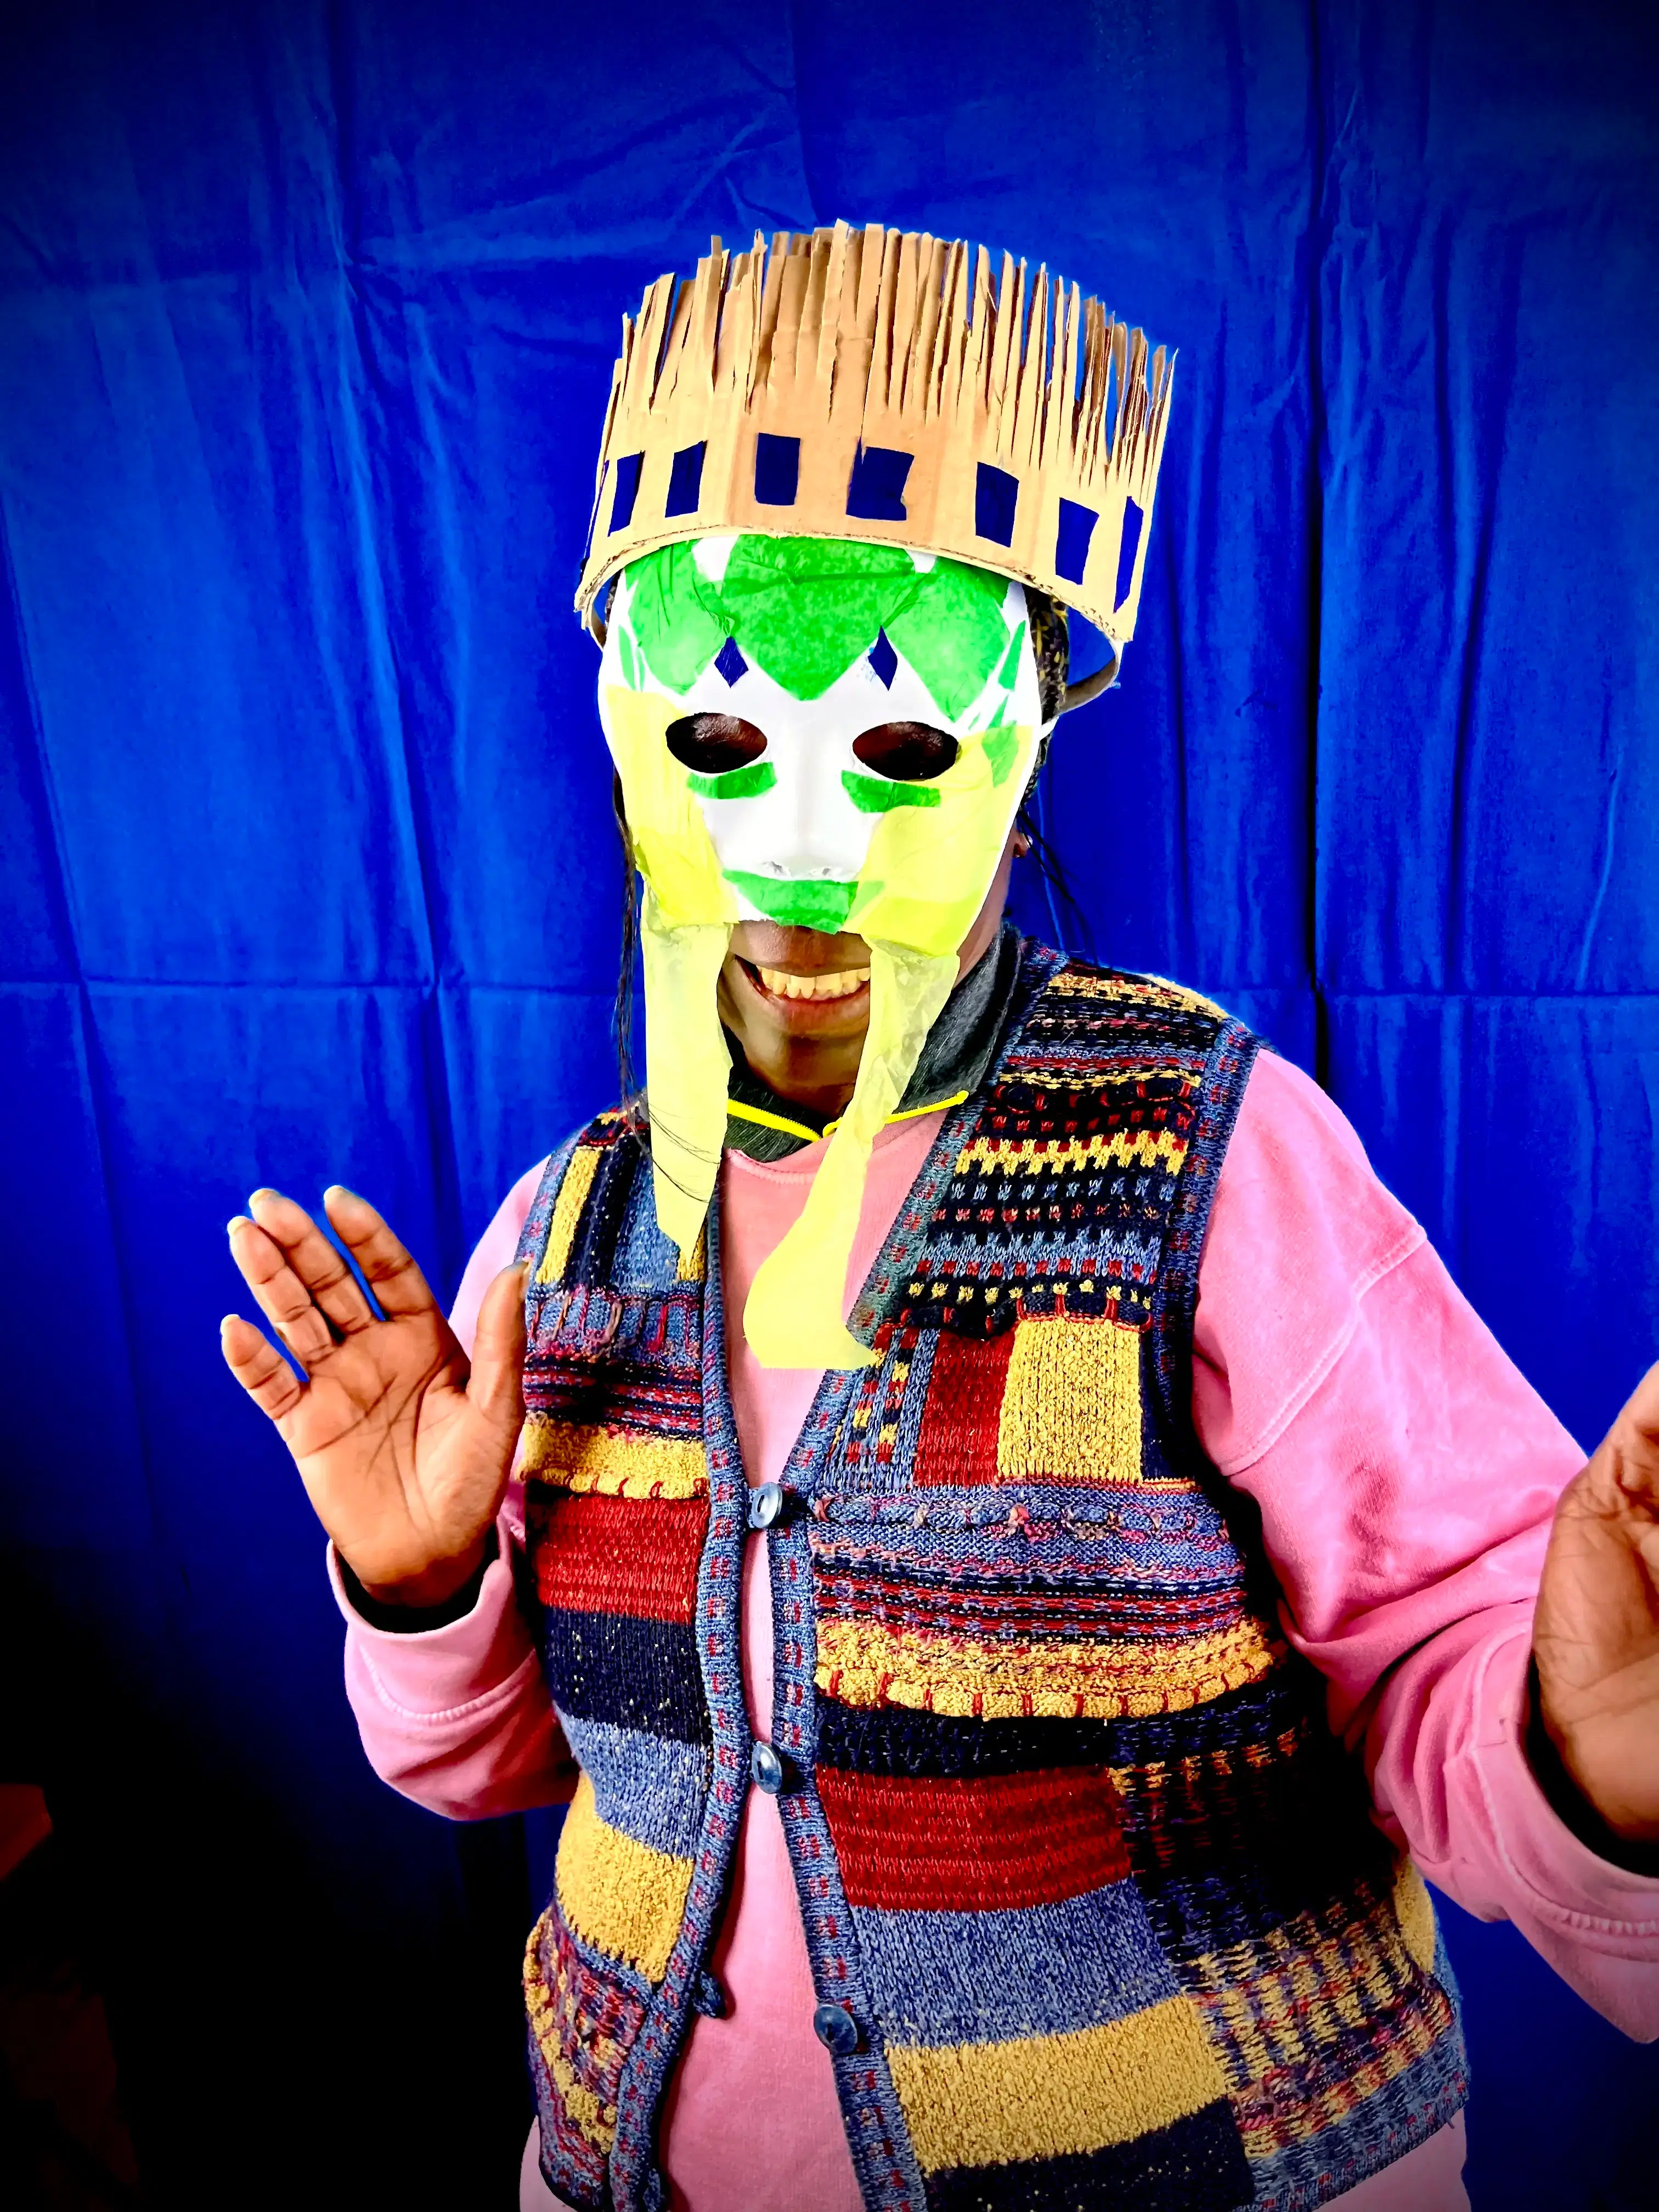 A person wearing a colorful knit vest and a pink shirt, posing cheerfully with their hands up, sporting a creative mask made of paper and cardboard with a playful straw-like top.